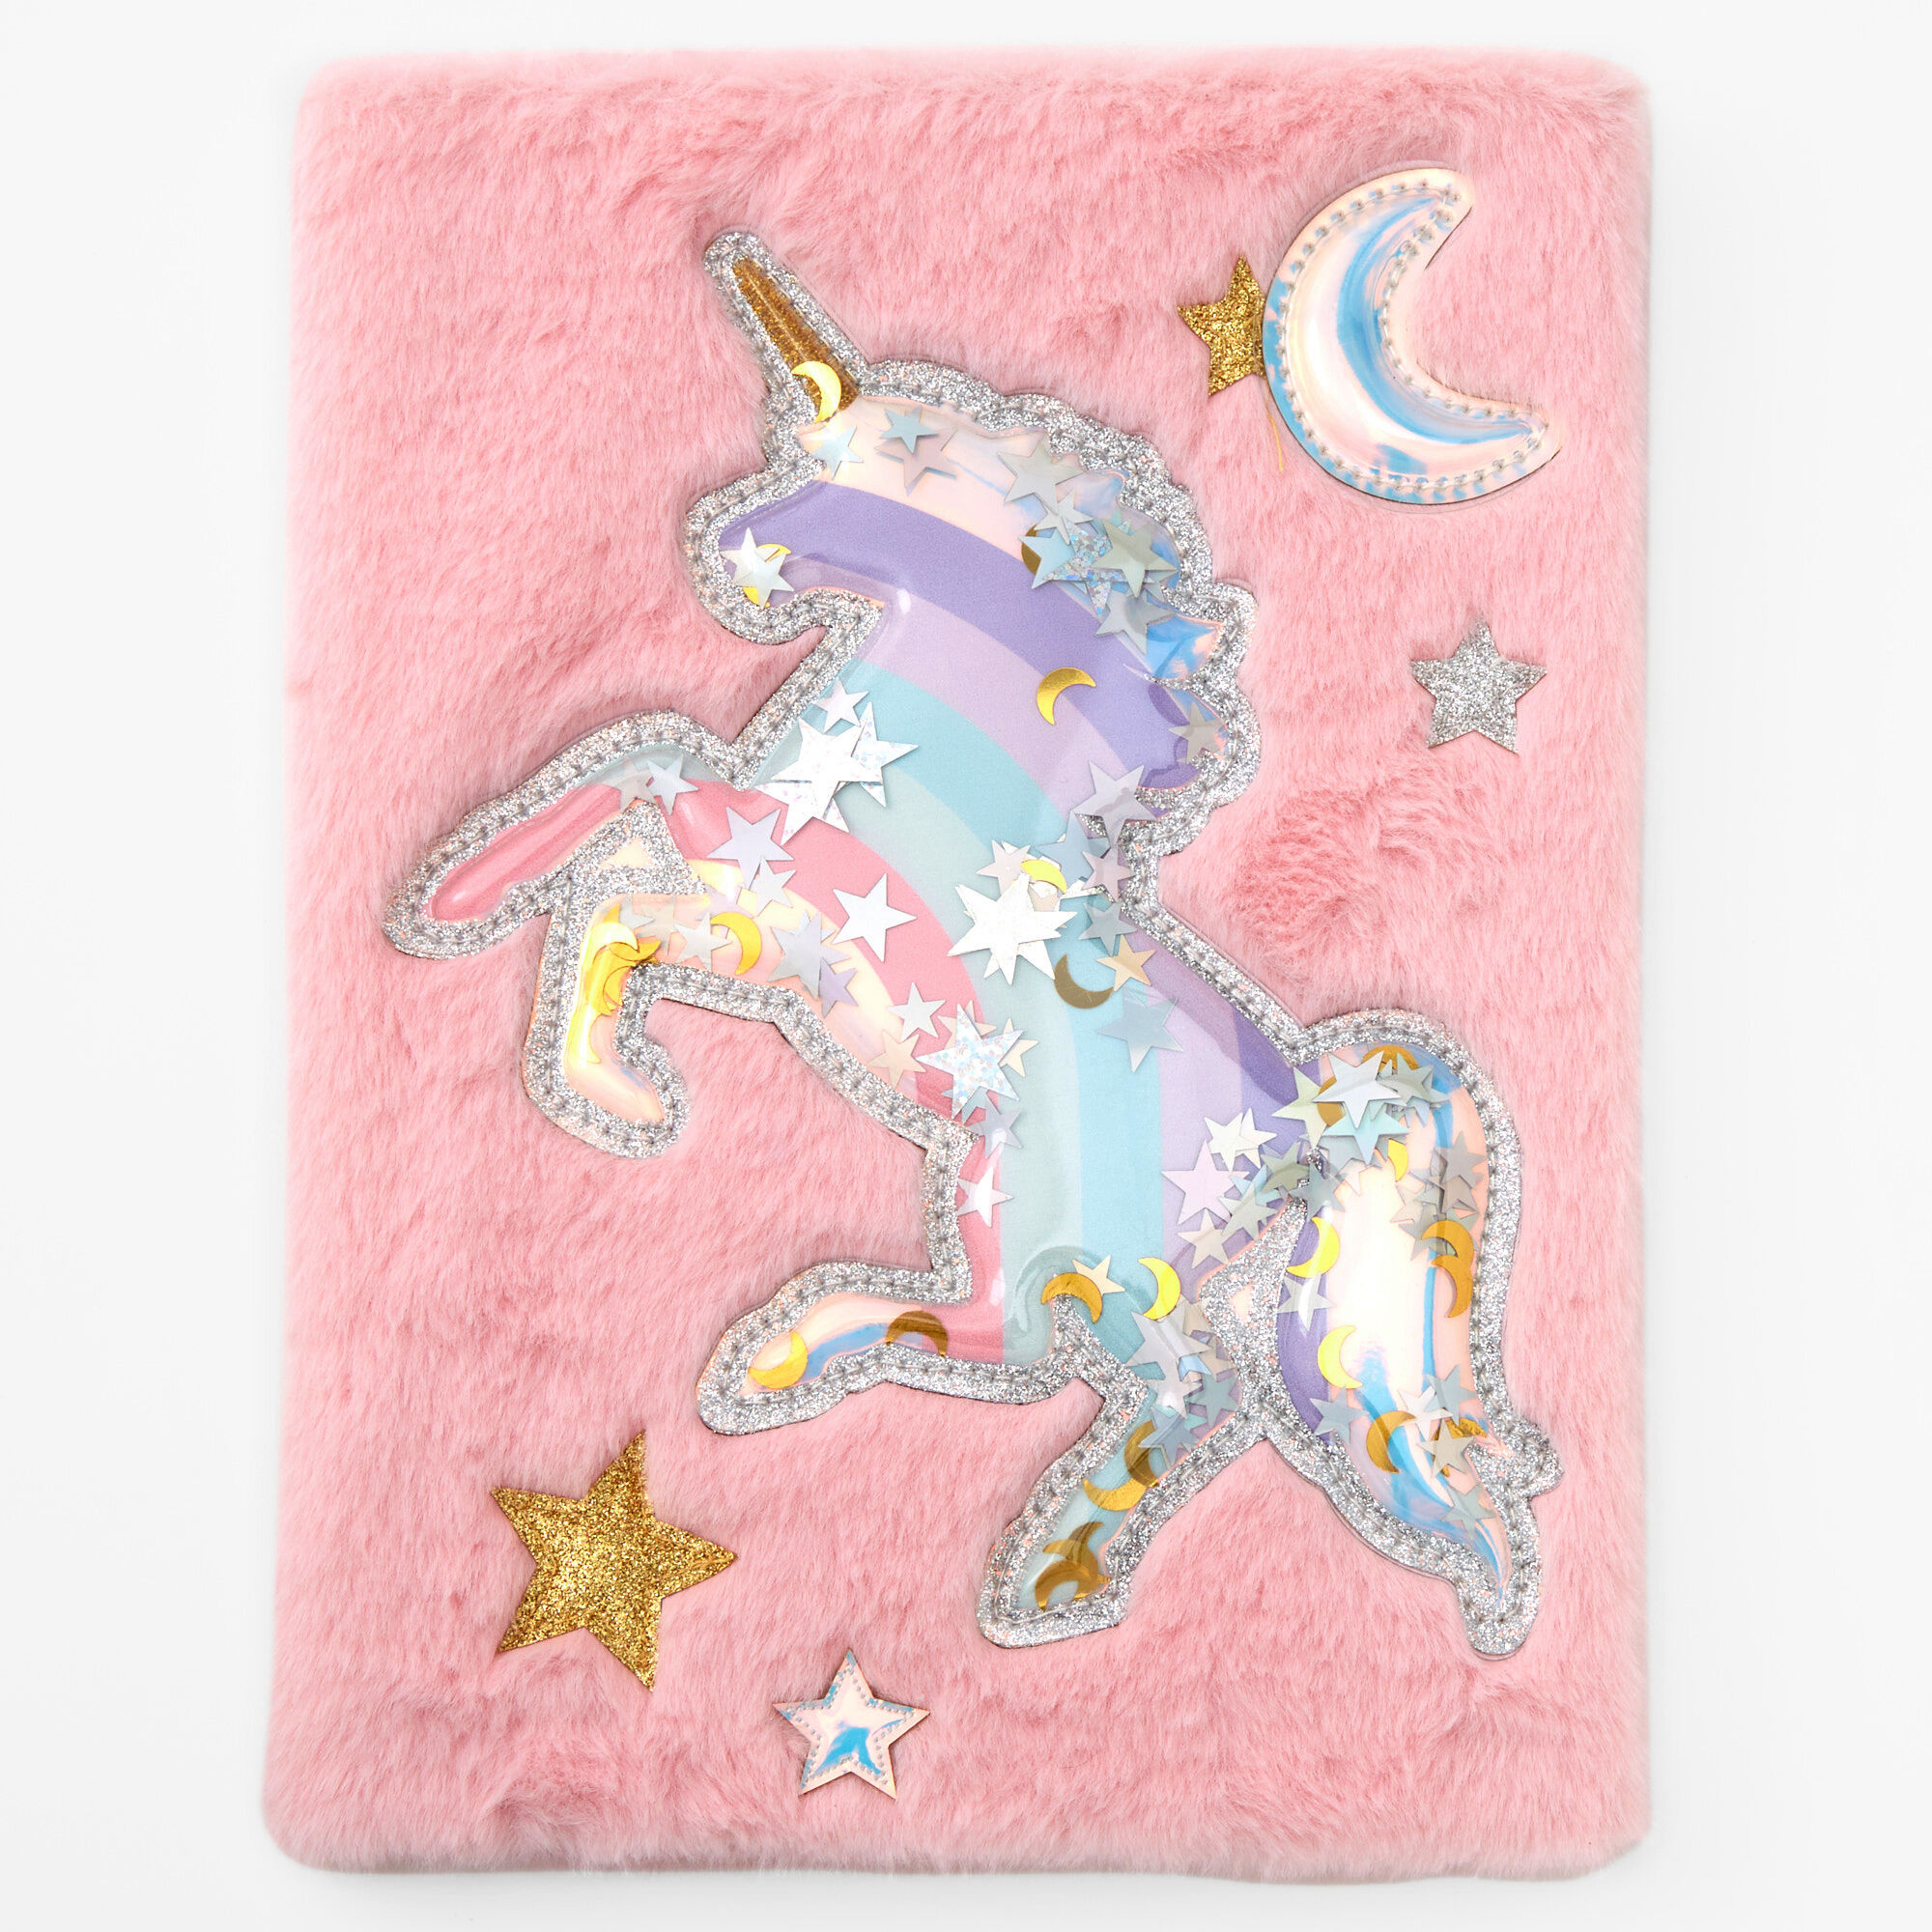 3D Unicorn Magnets 4 Pack New From Claires 